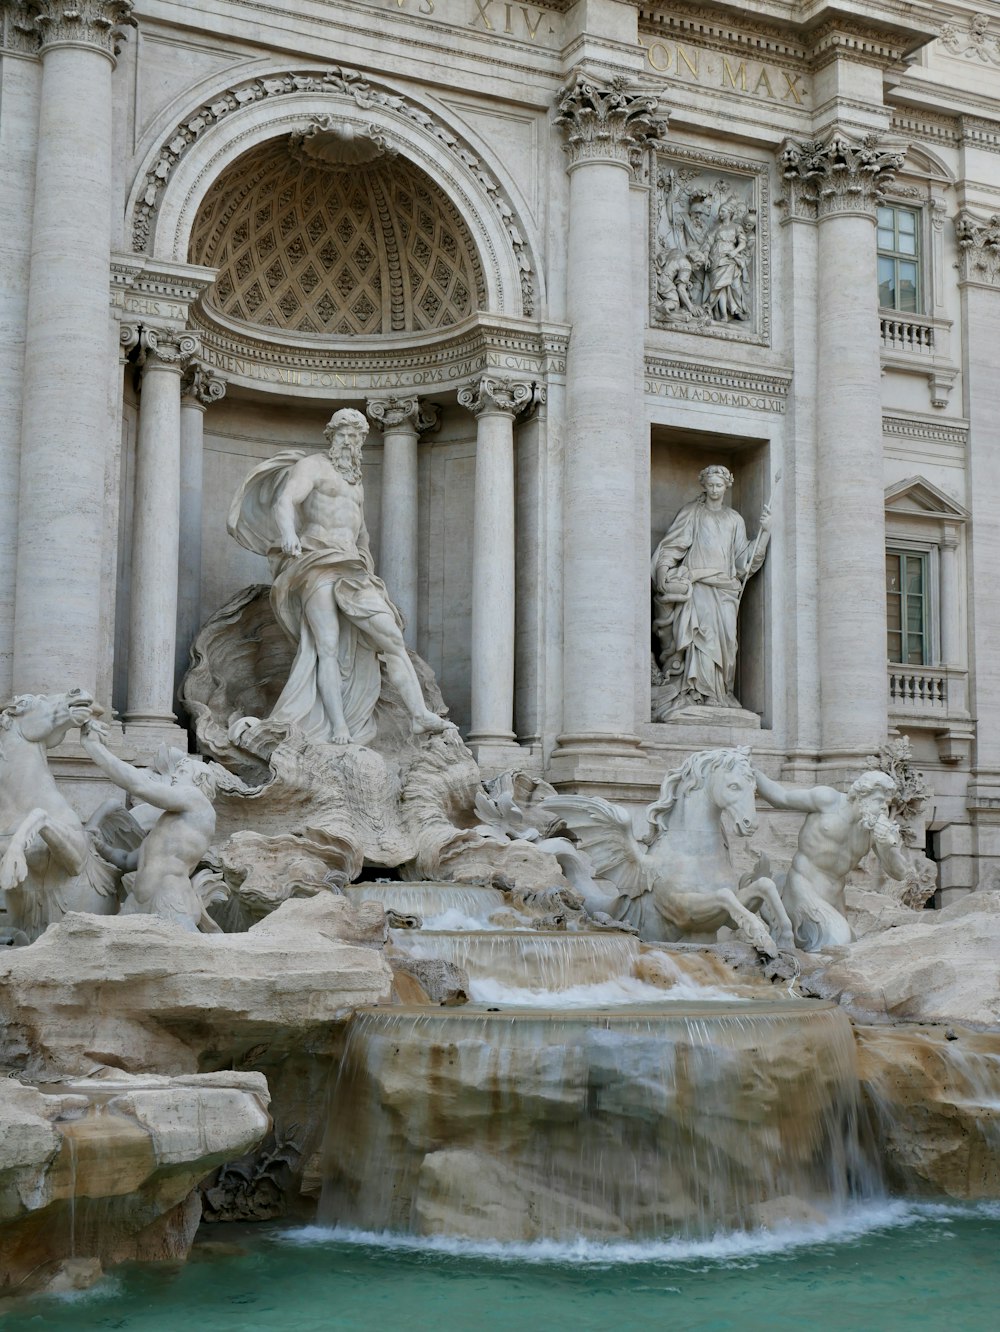 a fountain in front of Trevi Fountain